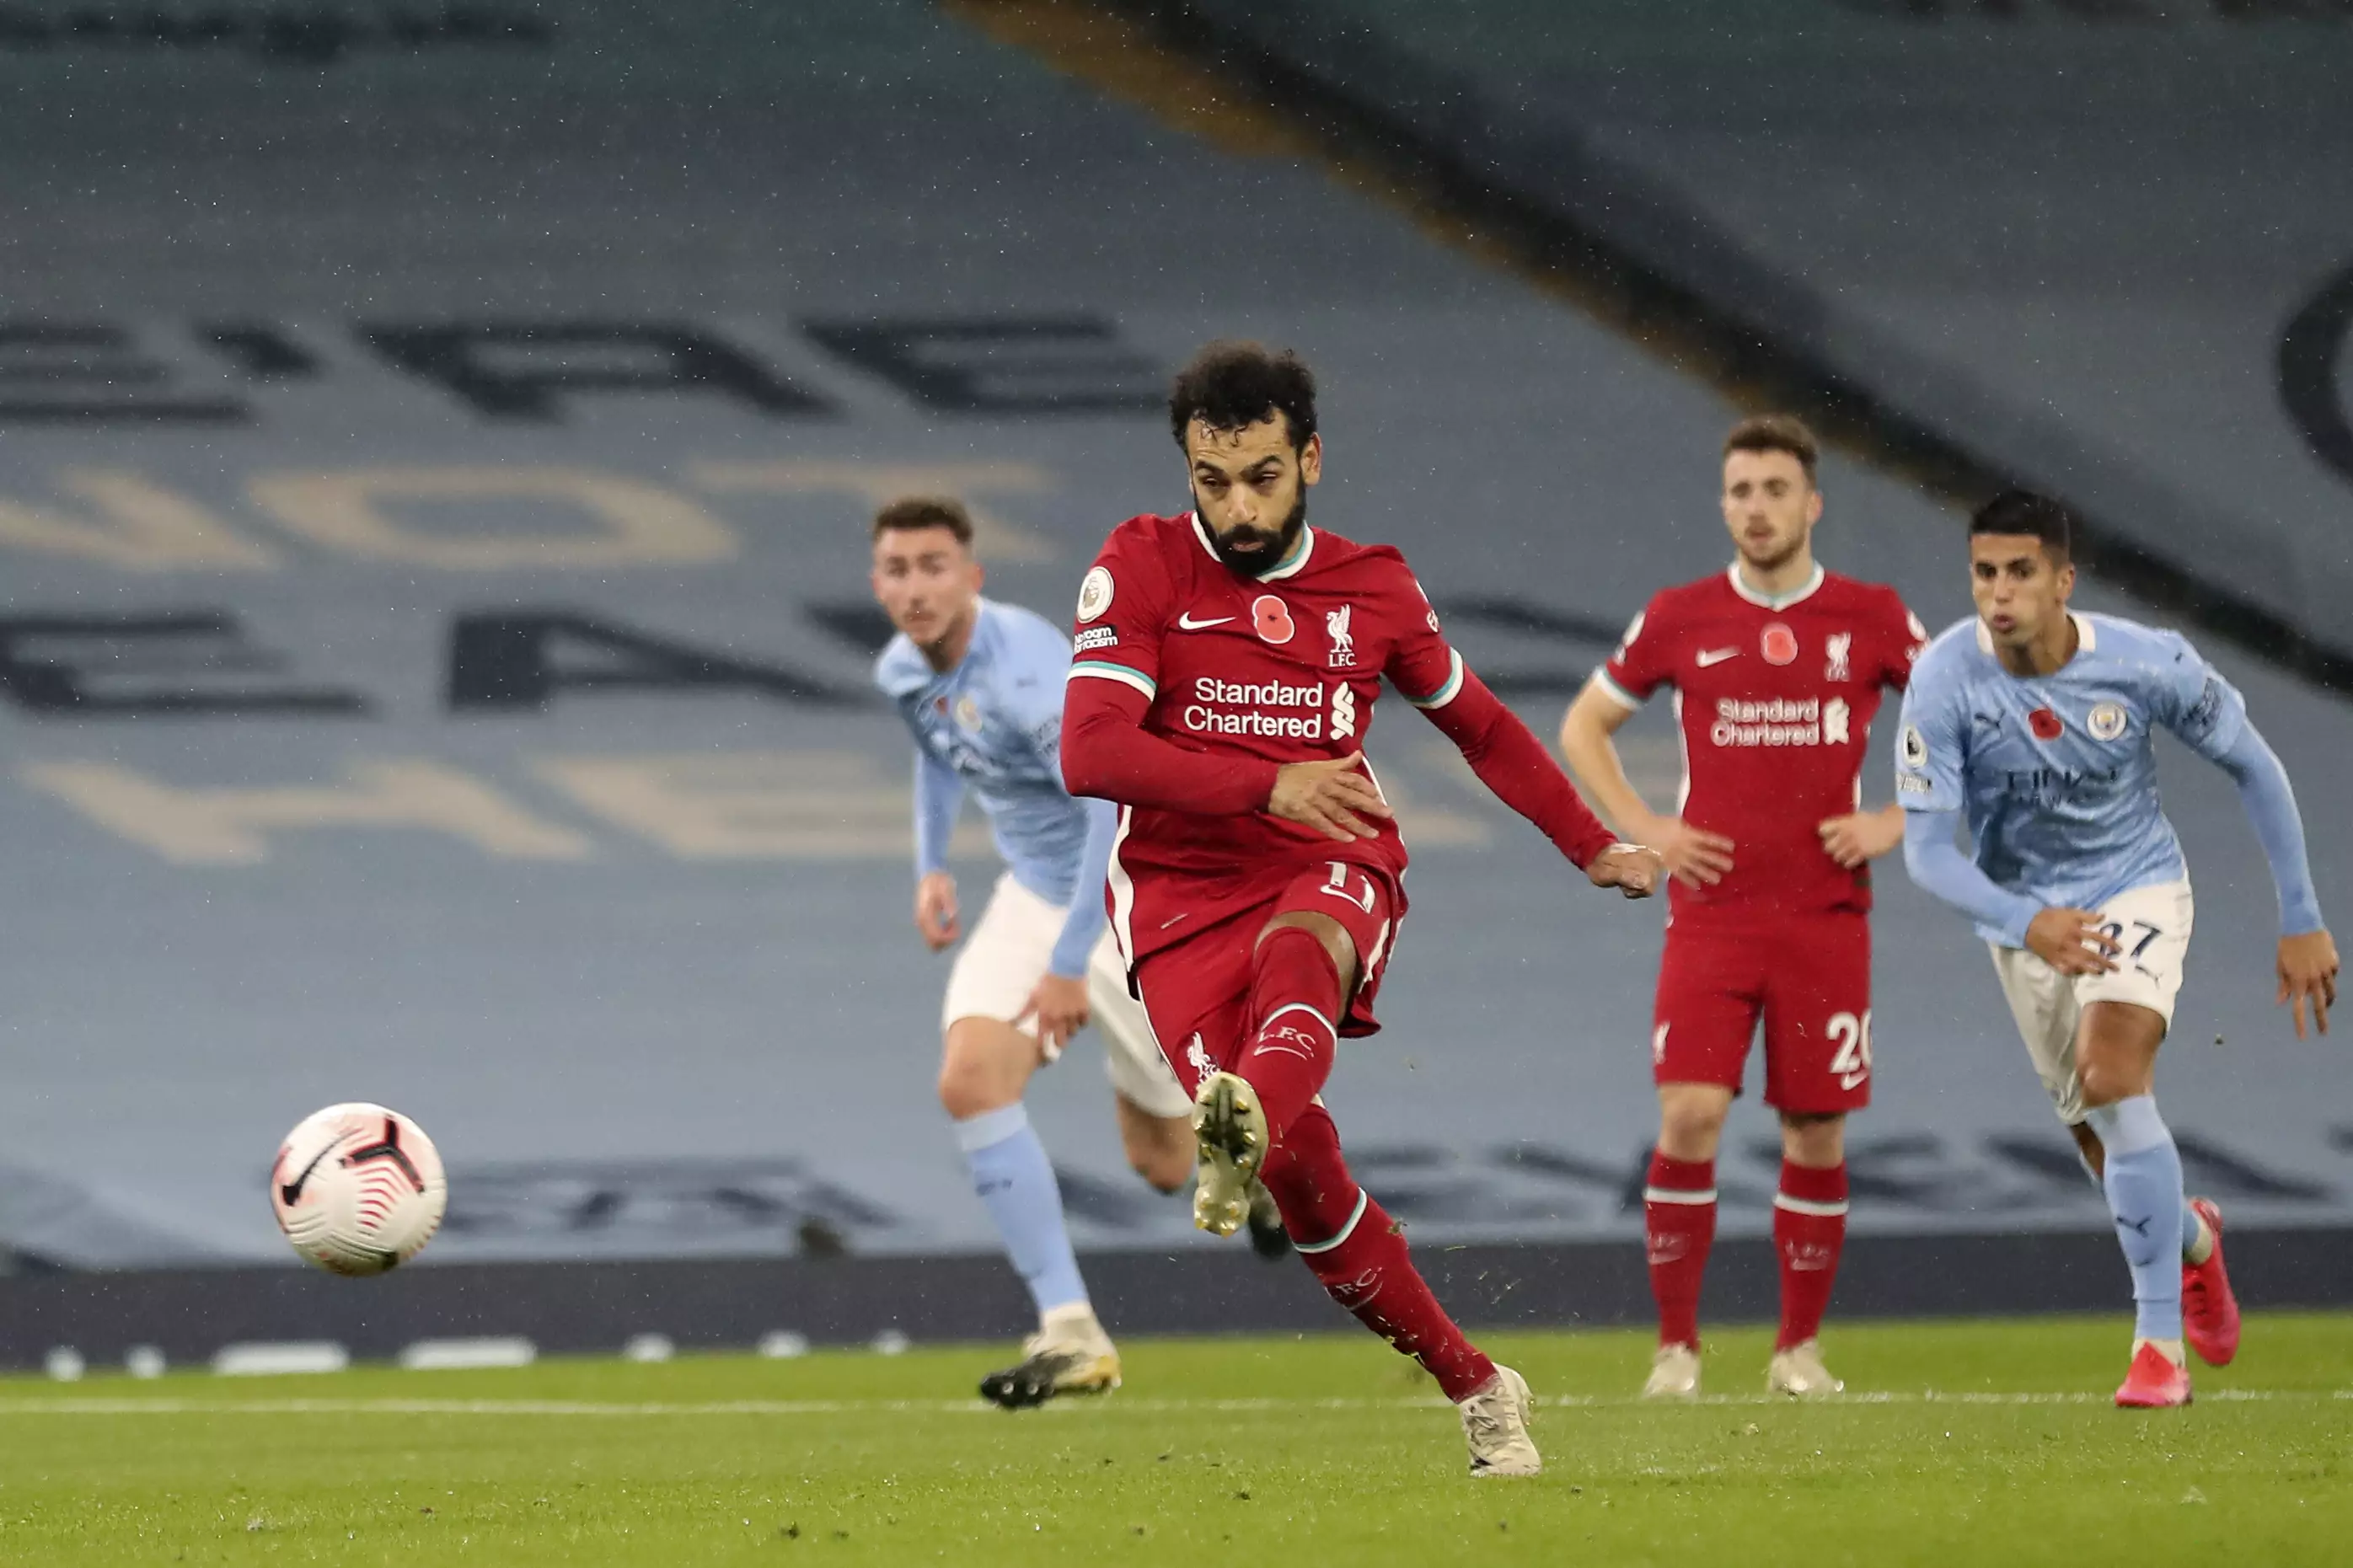 Salah scored for Liverpool in his most recent game. Image: PA Images